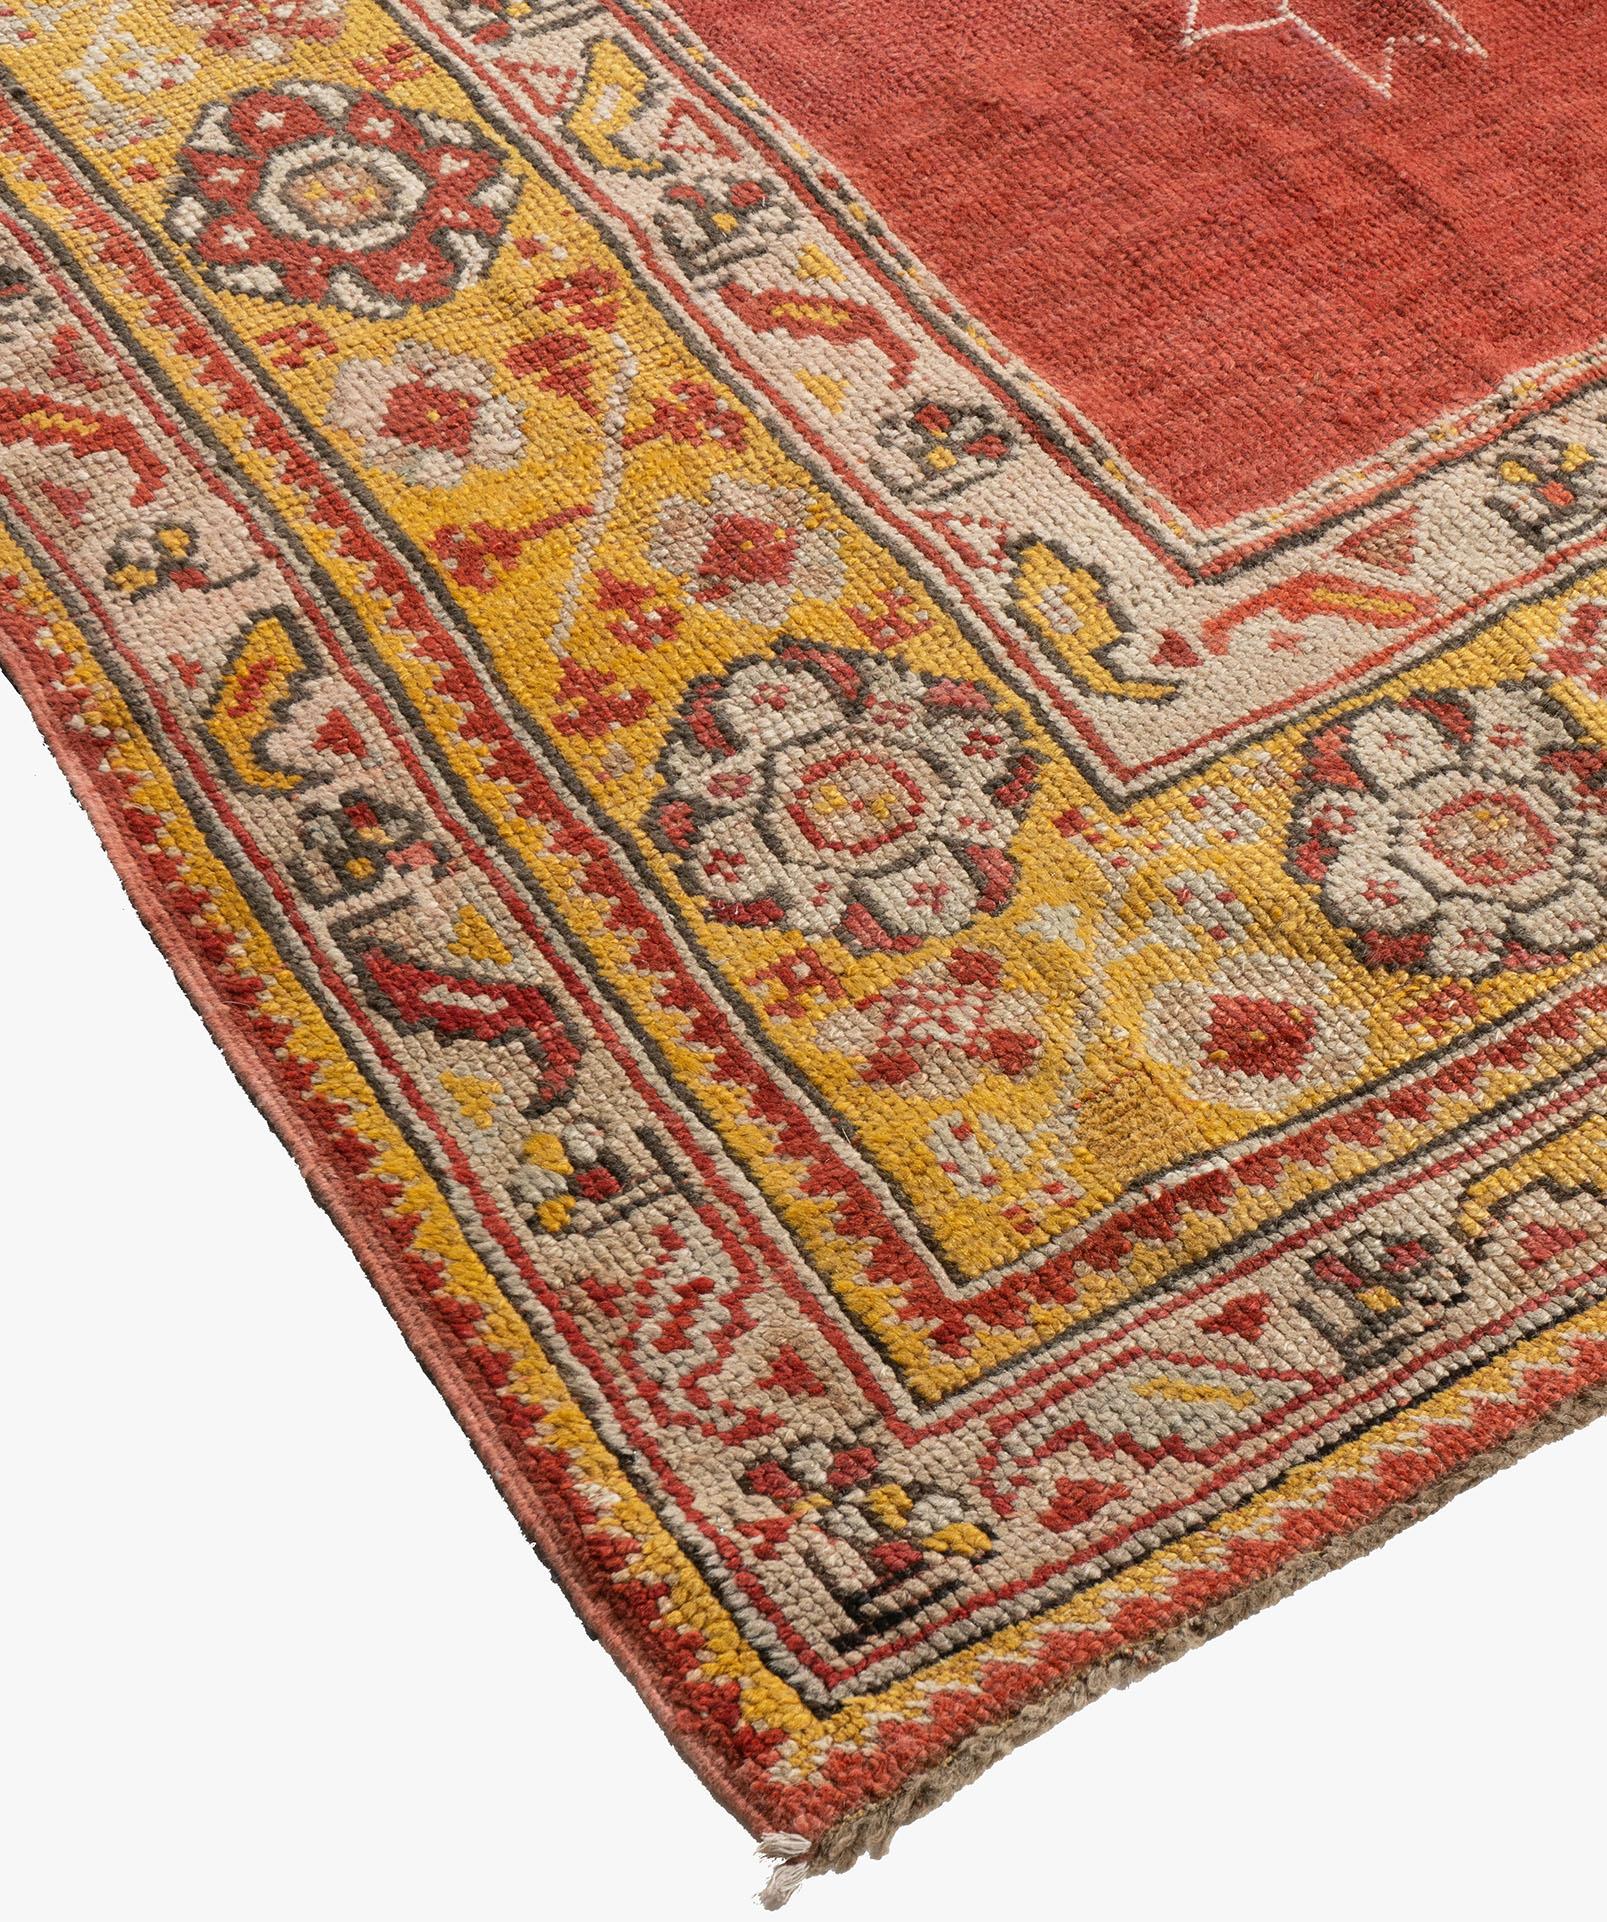 Antique Turkish Oushak Rug  8'8 x 11'6 In Good Condition For Sale In New York, NY